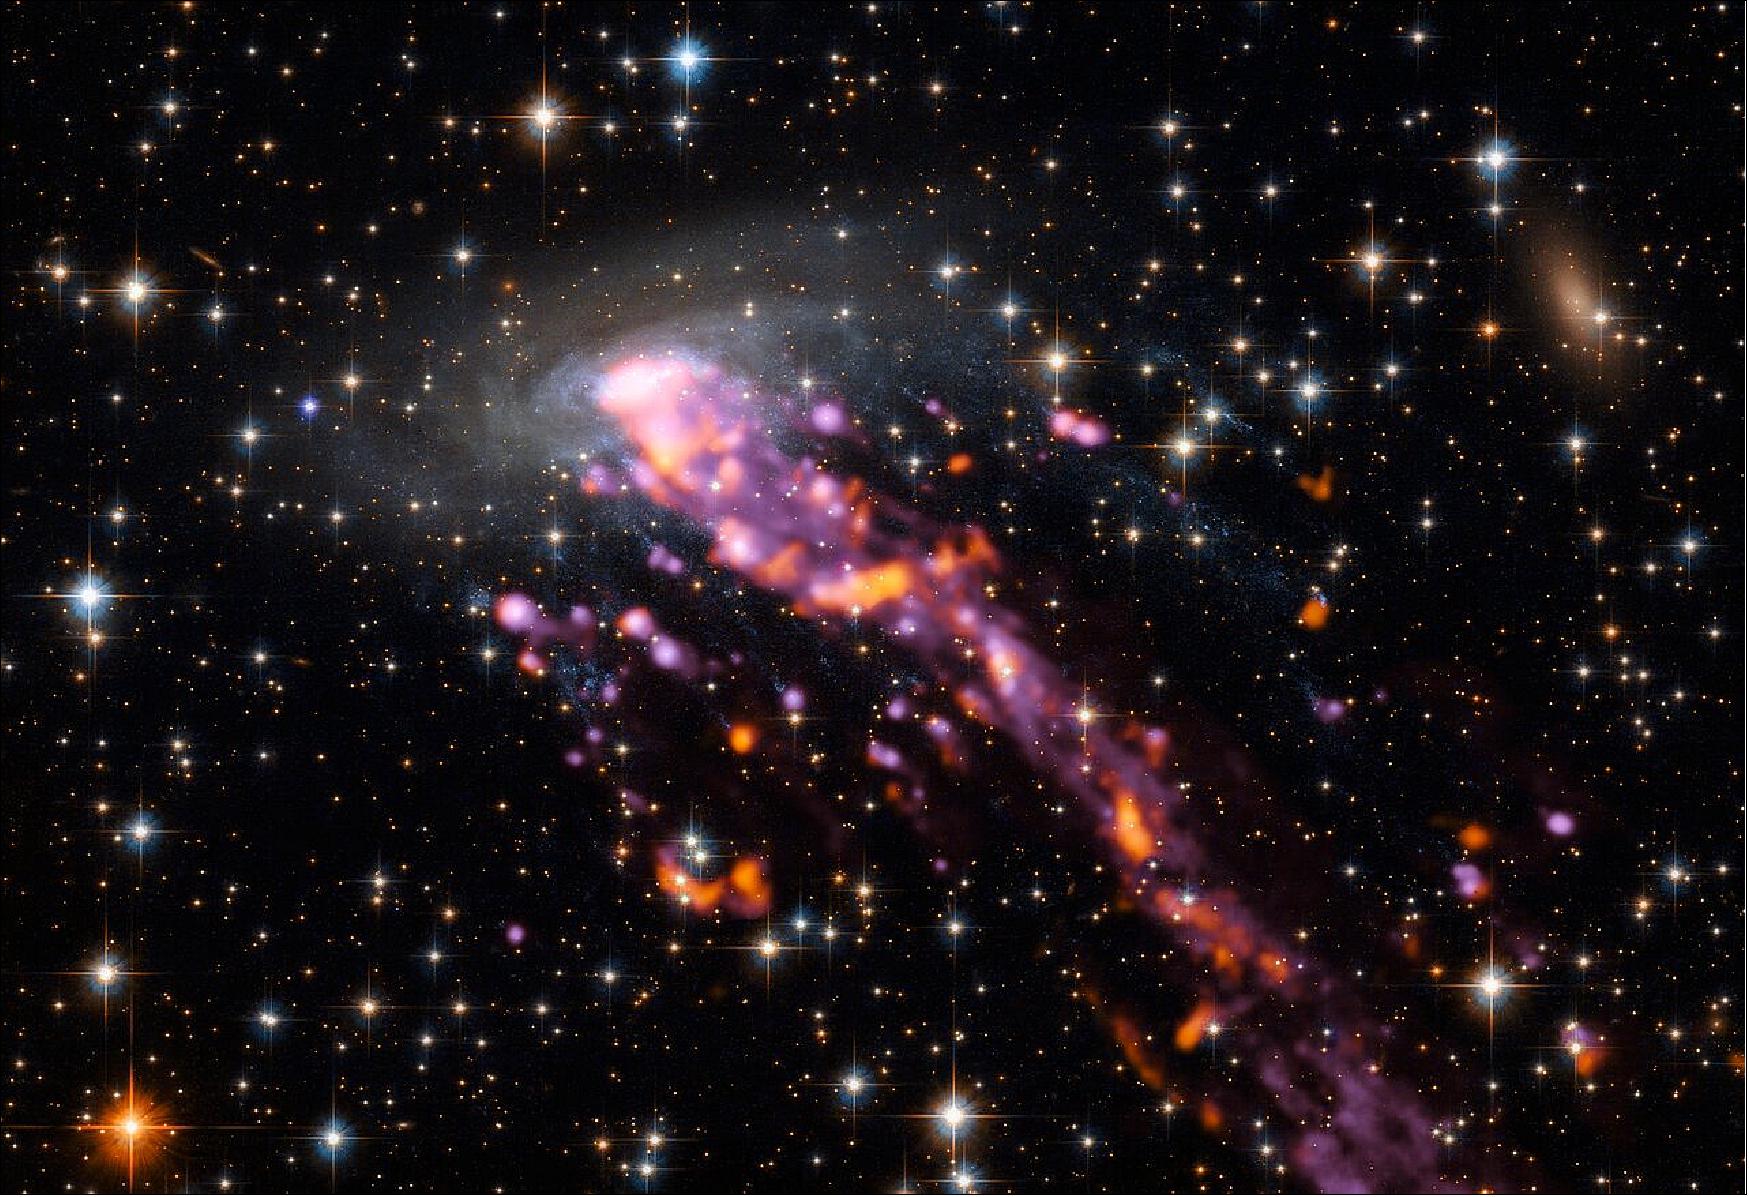 Figure 84: This celestial cnidarian is shown here in beautiful detail. The various elements making up this image were captured by different telescopes. The galaxy and its surroundings were imaged by the NASA/ESA Hubble Space Telescope; its tails, which trace streams of hydrogen and show up in hues of bright purple, by the MUSE instrument mounted on the VLT; and bright hotspots of carbon dioxide emission from within the system, which show up as flares of orange-red, were spotted by ALMA [image credit: ALMA (ESO/NAOJ/NRAO), P. Jachym (Czech Academy of Sciences) et al.]